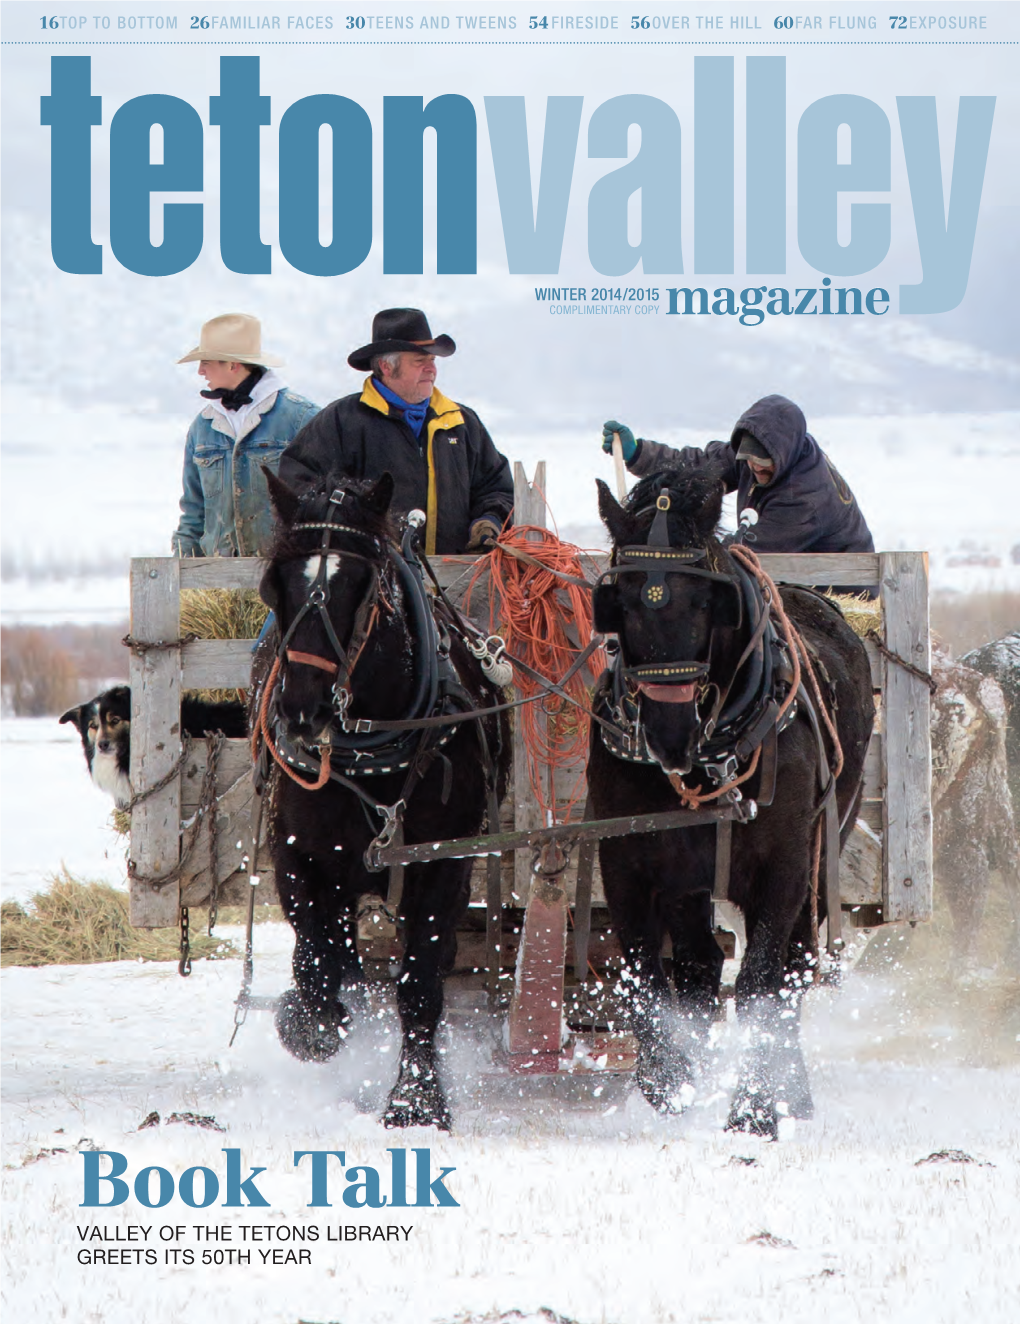 Book Talk VALLEY of the TETONS LIBRARY GREETS ITS 50TH YEAR